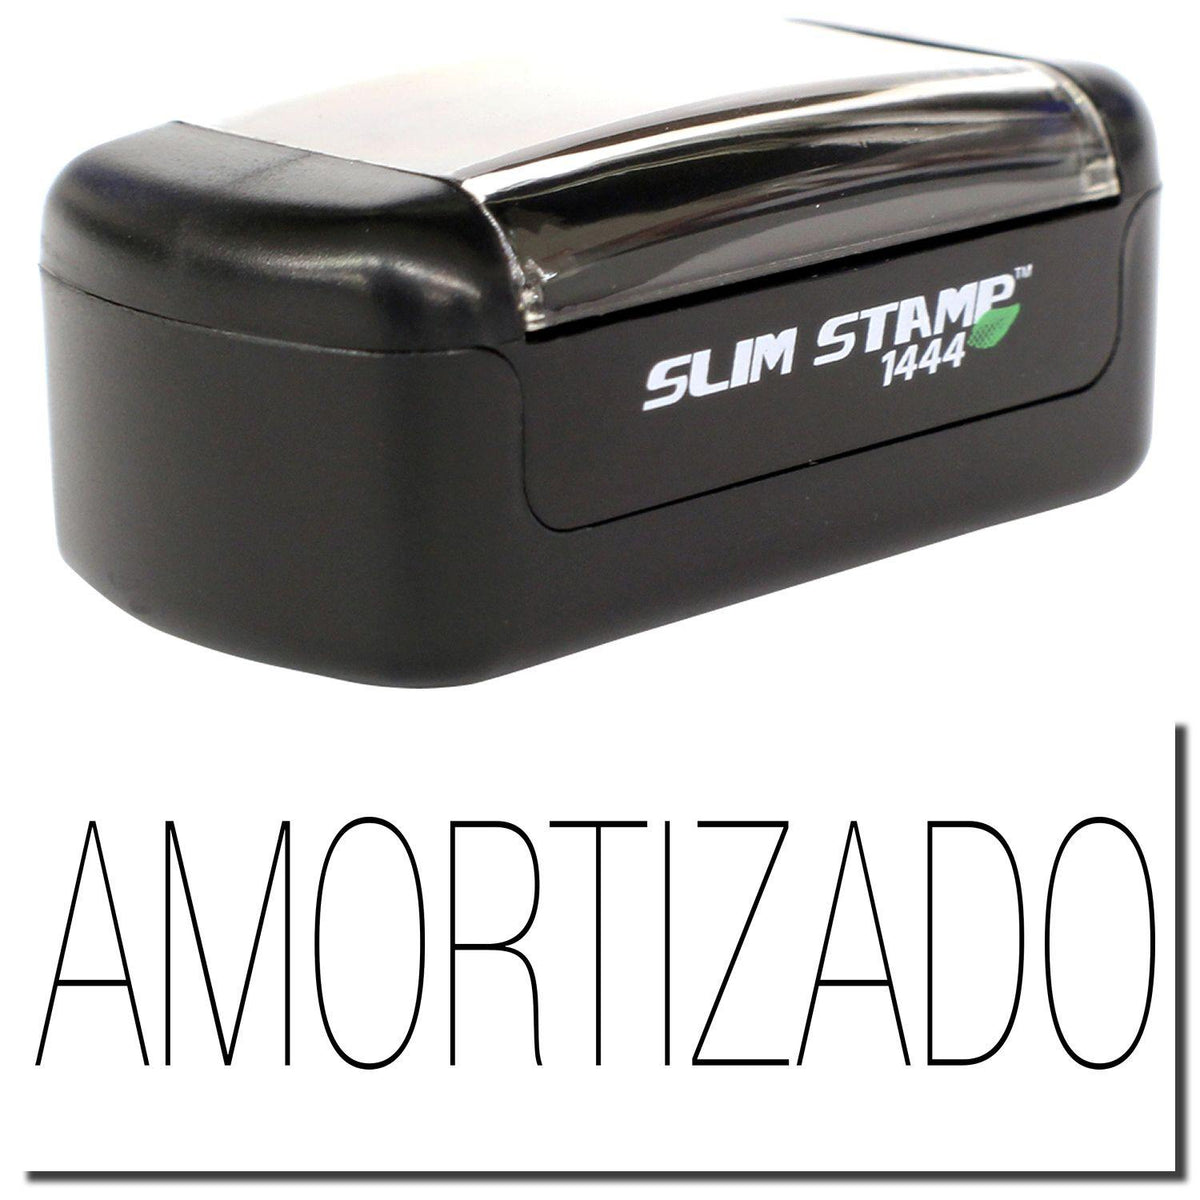 A stock office pre-inked stamp with a stamped image showing how the text &quot;AMORTIZADO&quot; is displayed after stamping.